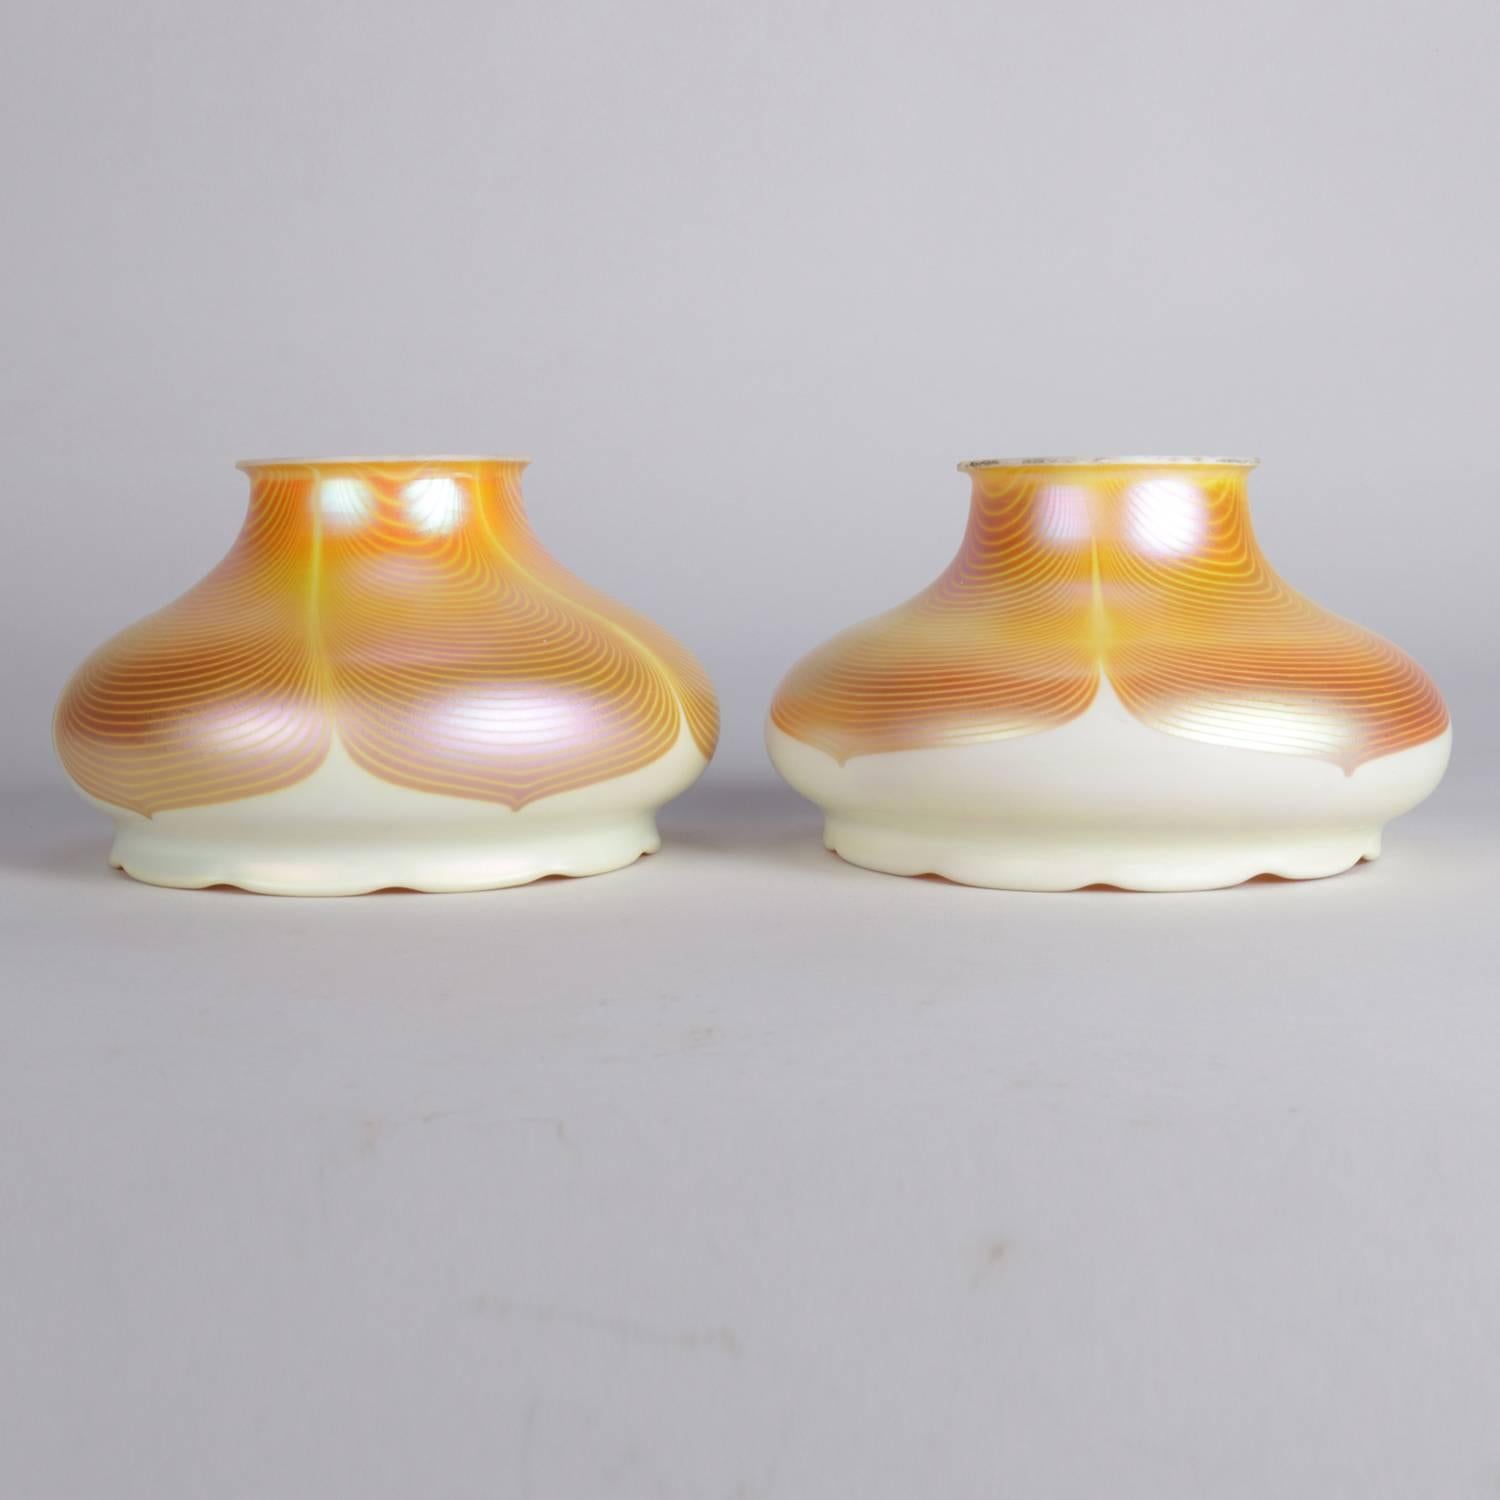 Pair of Arts & Crafts oversized Quezal art glass lamp shades feature gold aurene and calcite pulled feather design, floral form with ruffled rims, circa 1920

Measure: 5